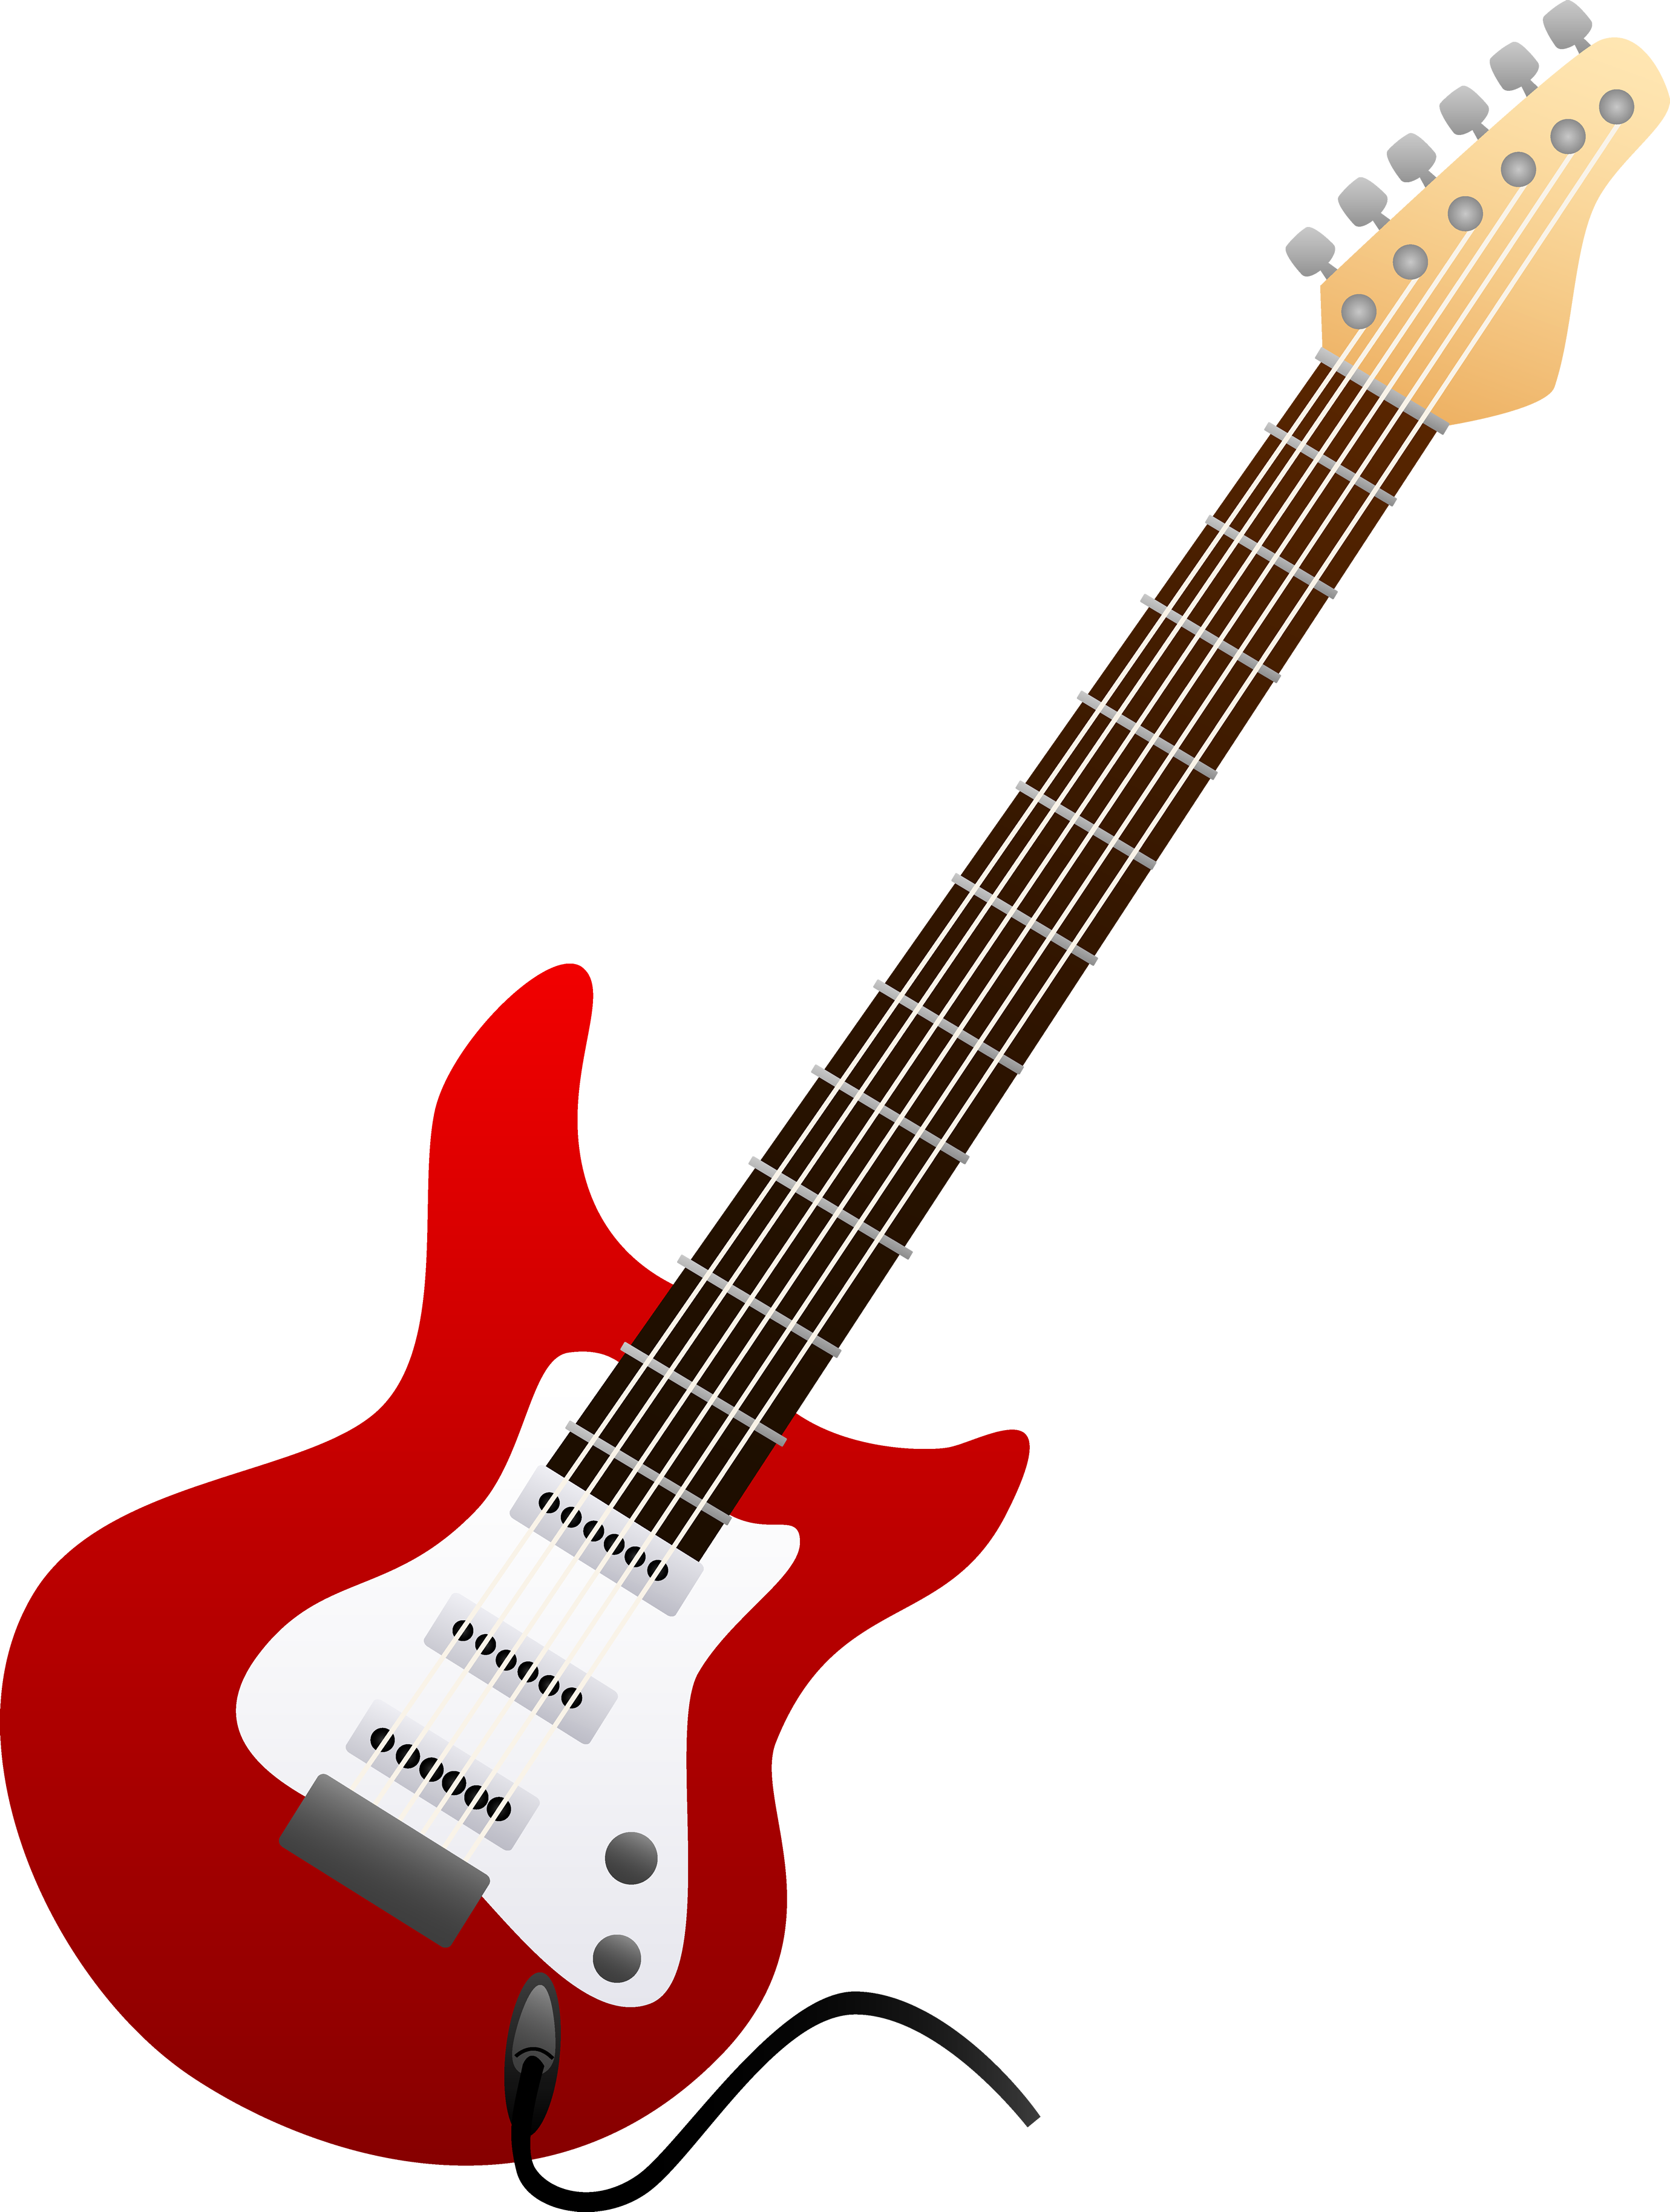 Guitar Stratocaster Fender Electric Cartoon Free Transparent Image HD Clipart